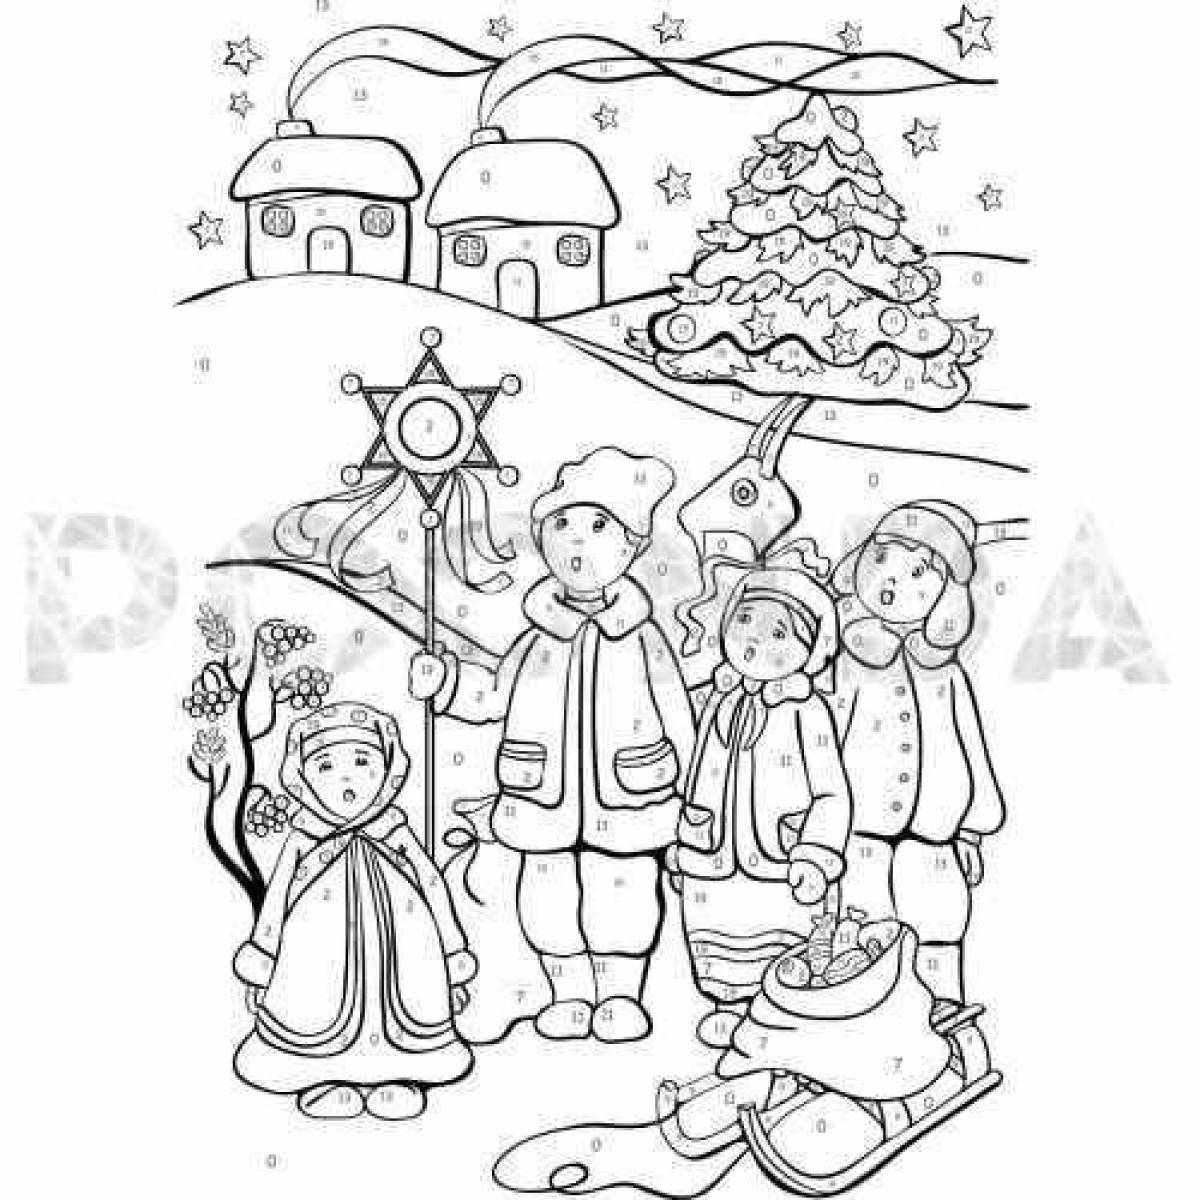 Exquisite carol coloring book for kids